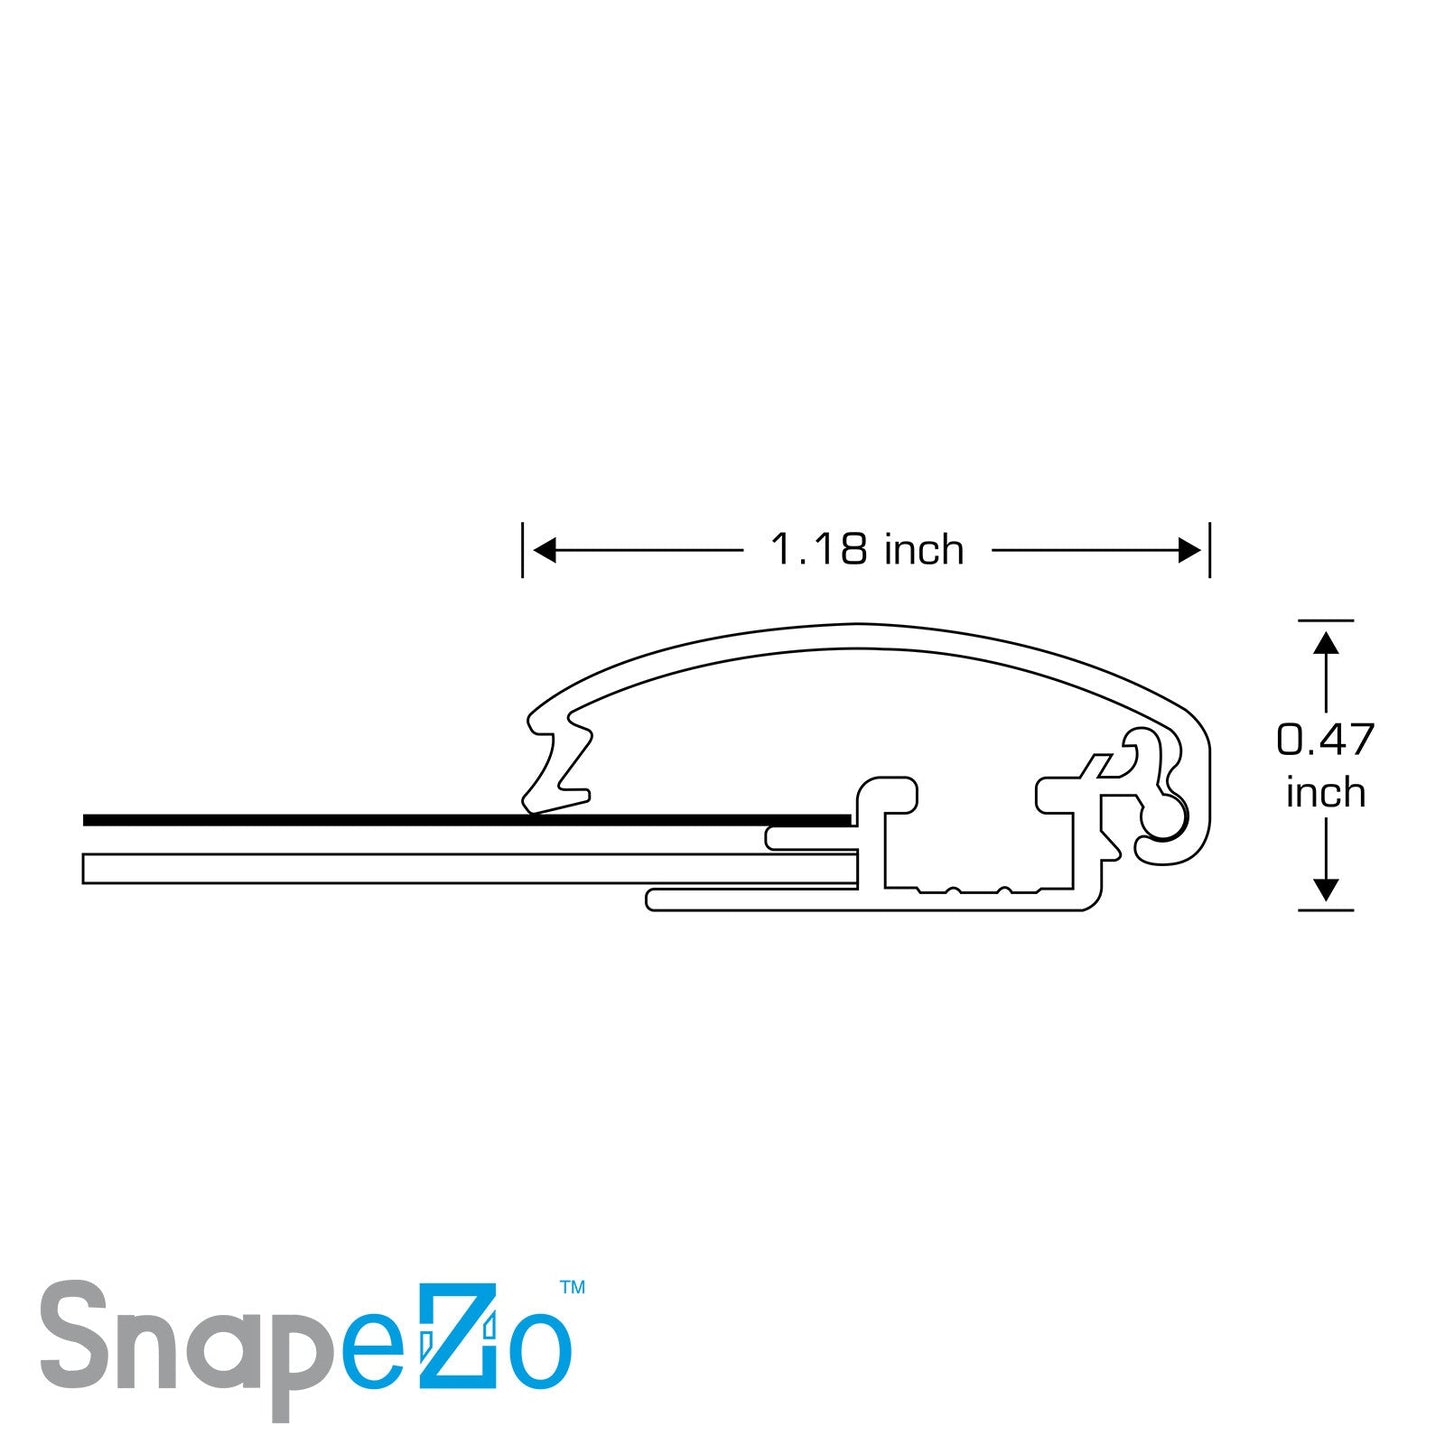 22x32 Red SnapeZo® Snap Frame - 1.2" Profile